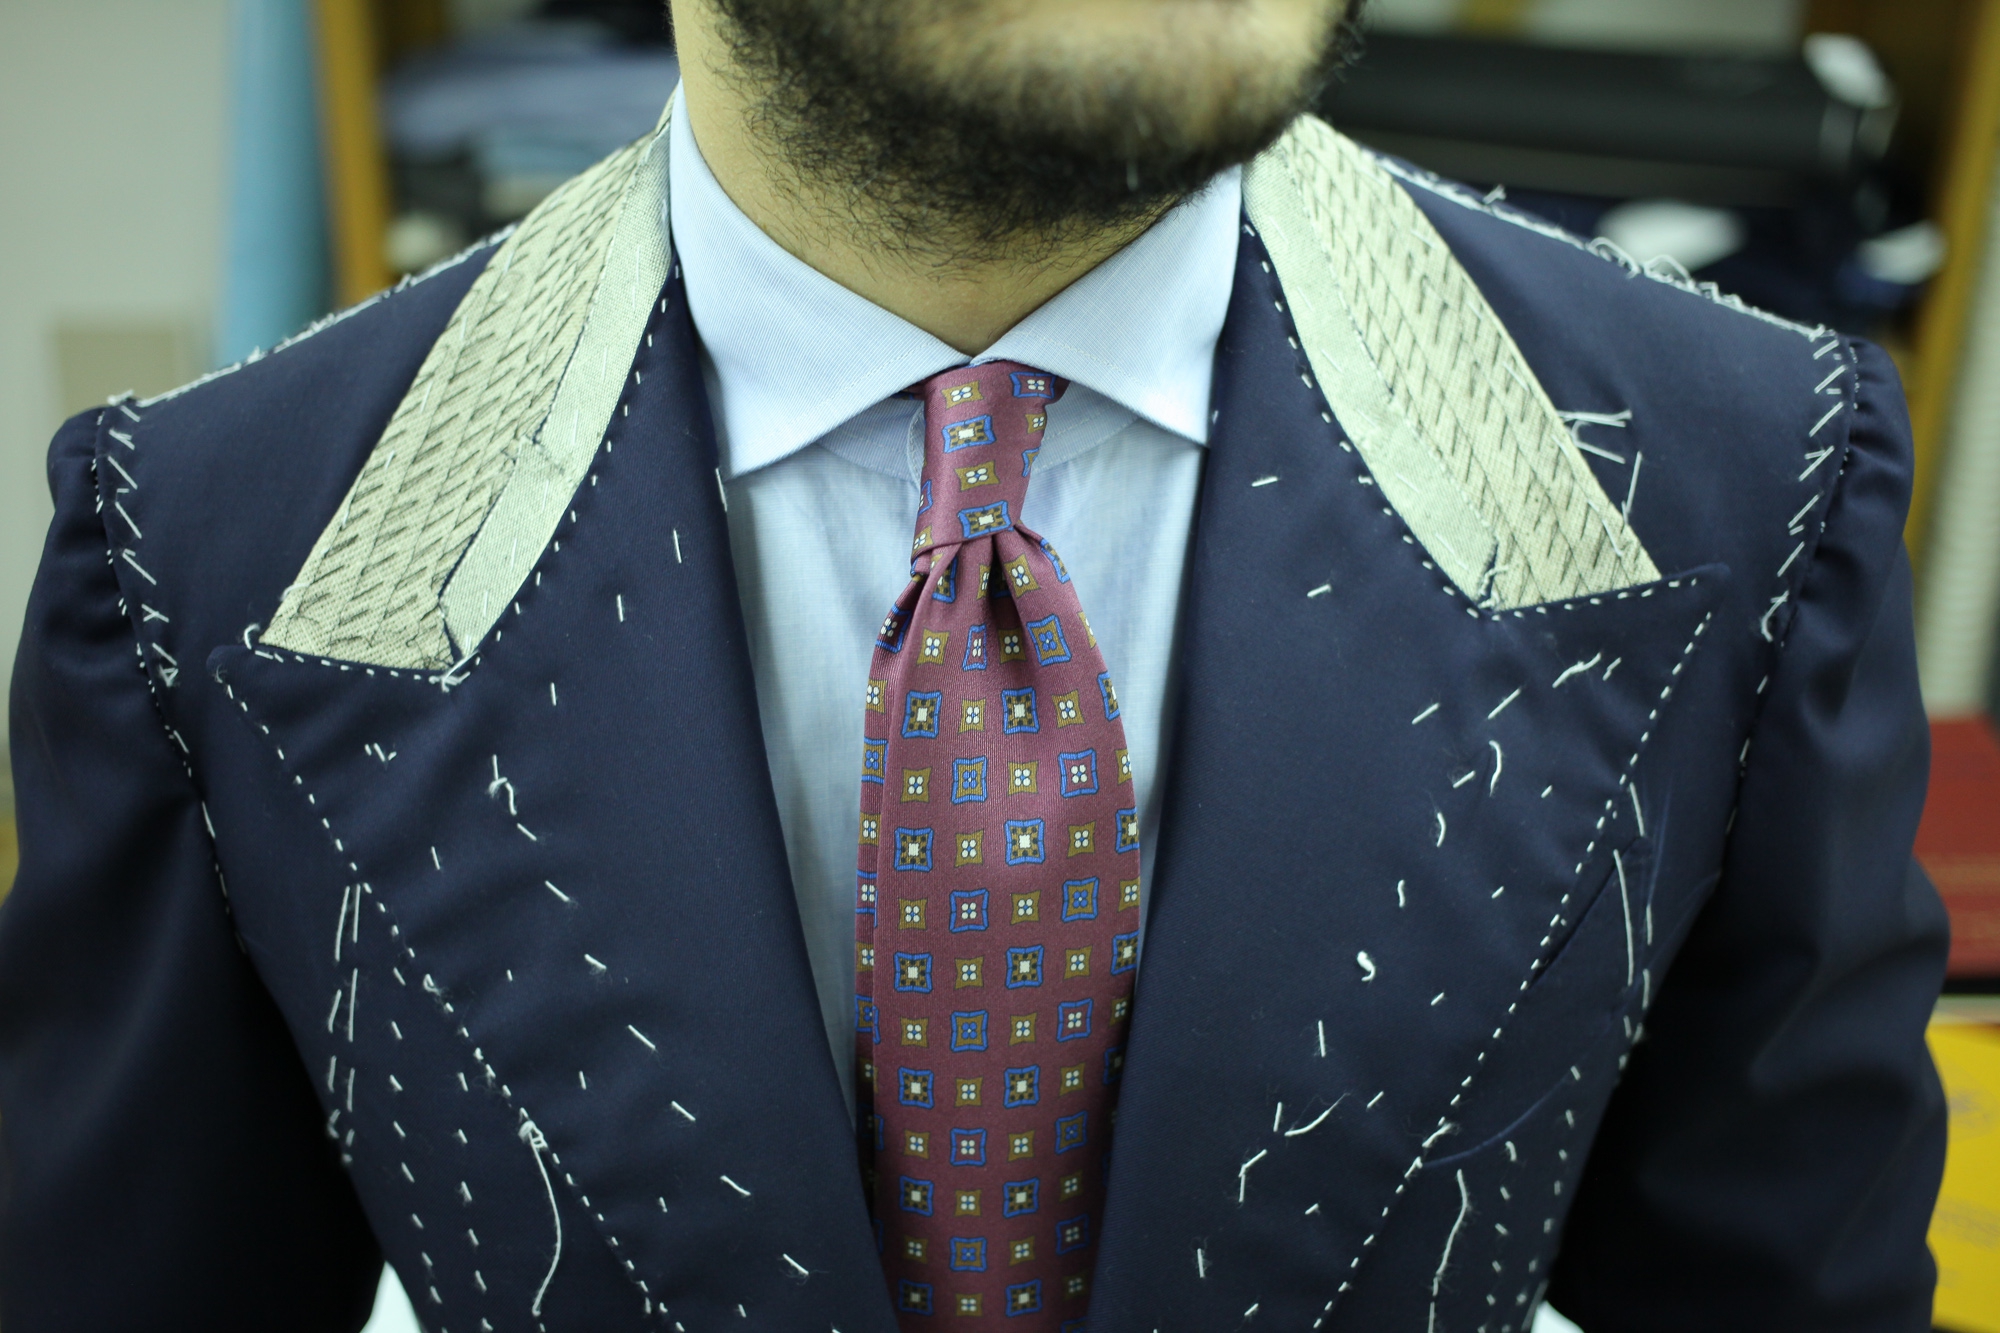 Edesim - Concave Lapel Line Fitting of a three-piece suit made from Holland&Sherry fabric